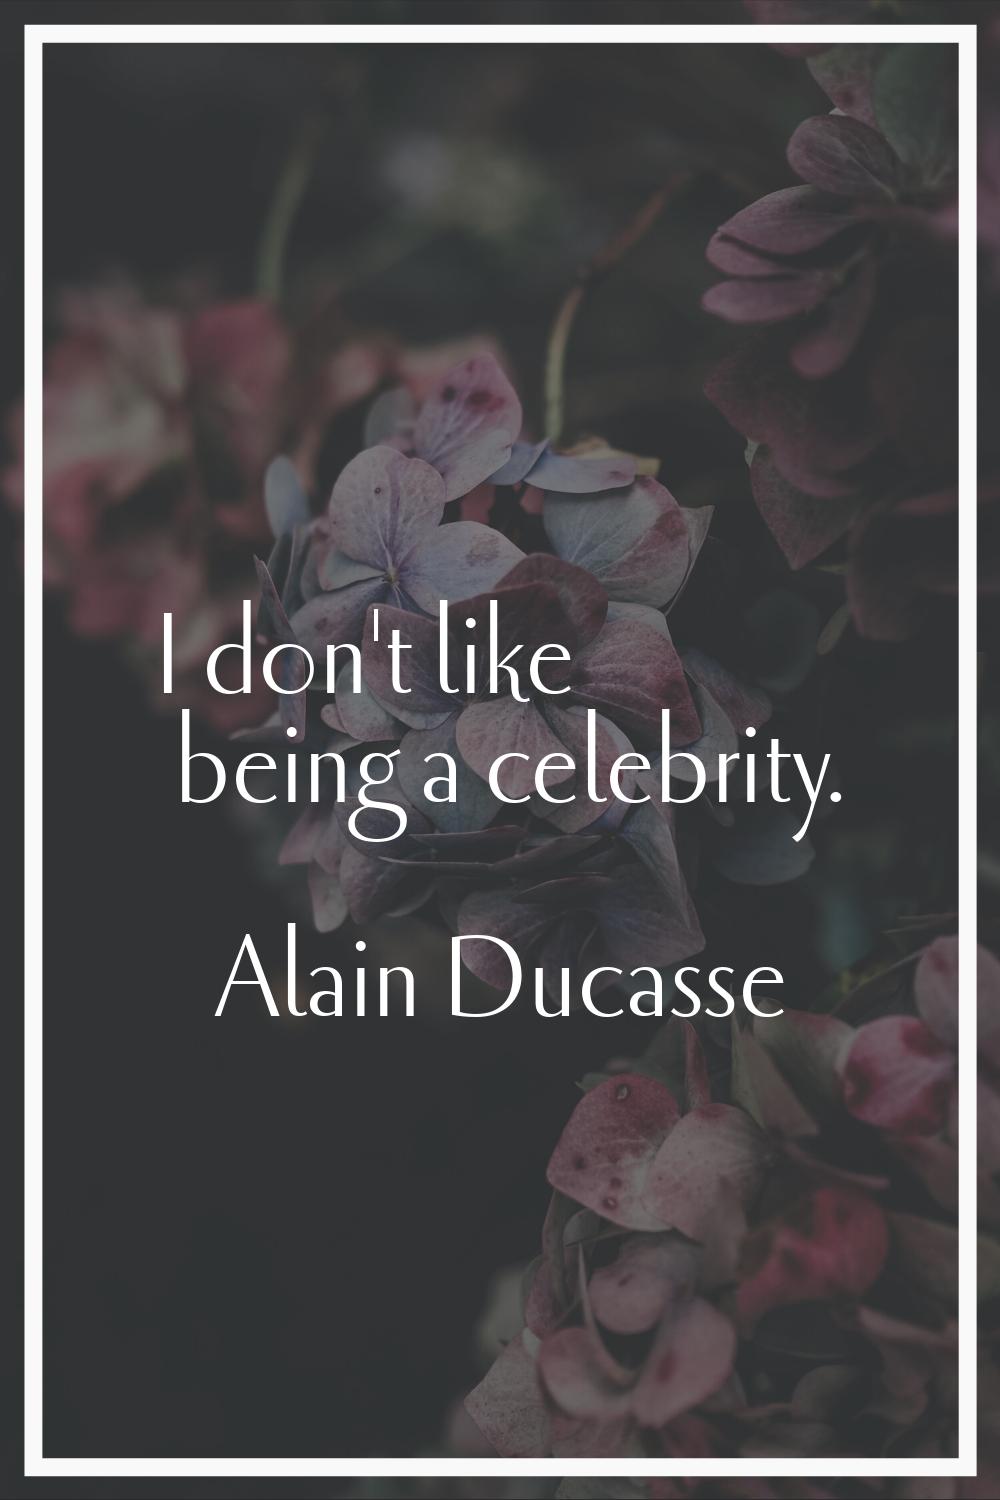 I don't like being a celebrity.